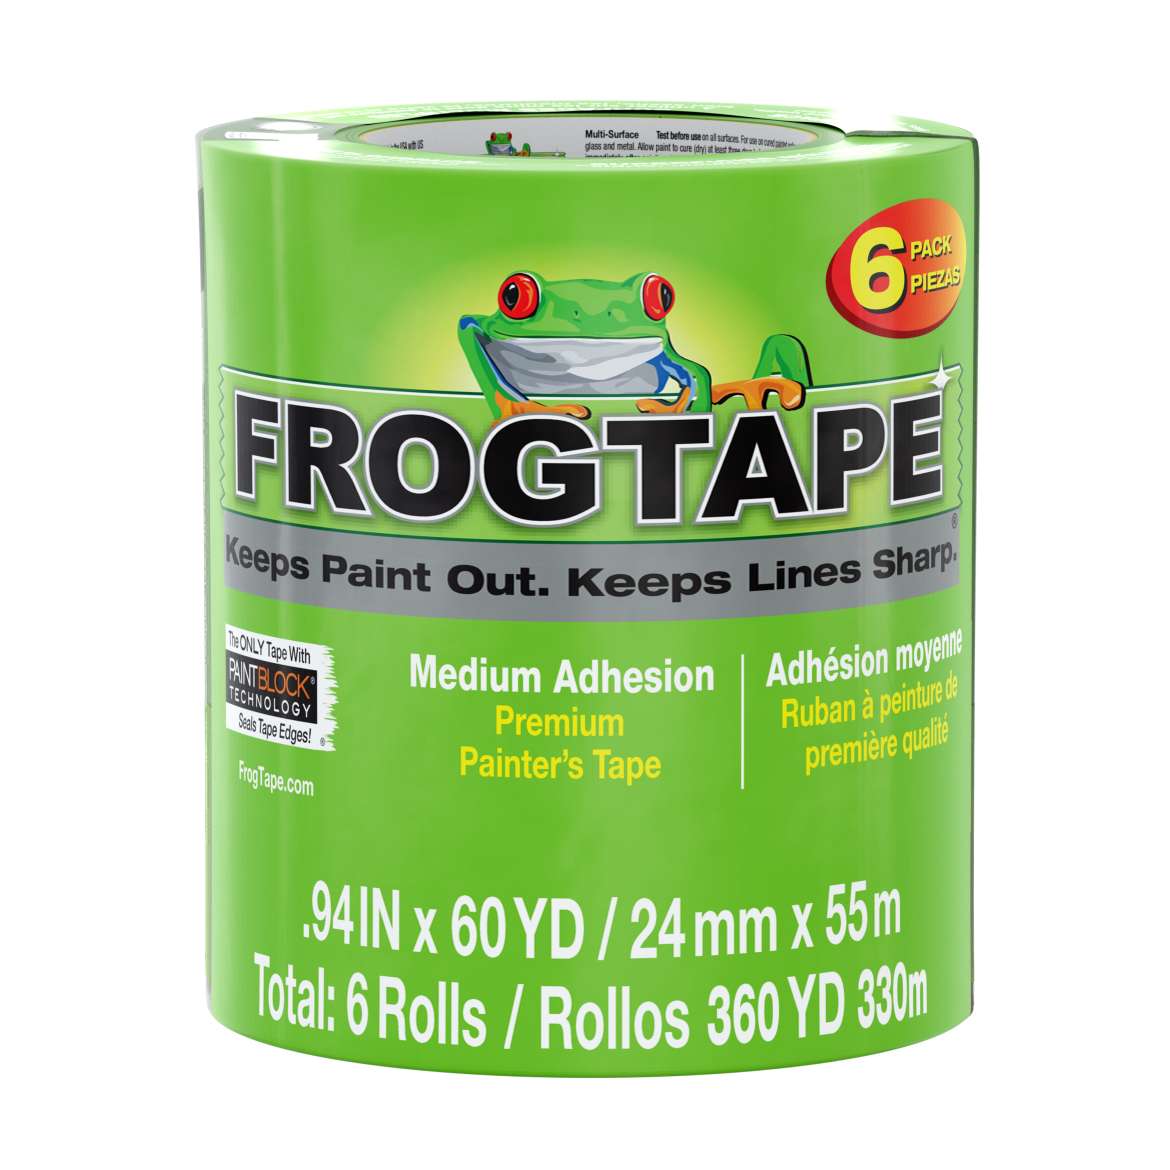 FrogTape® Multi-Surface Painter's Tape - Green, 6 pk, .94 in. x 60 yd.